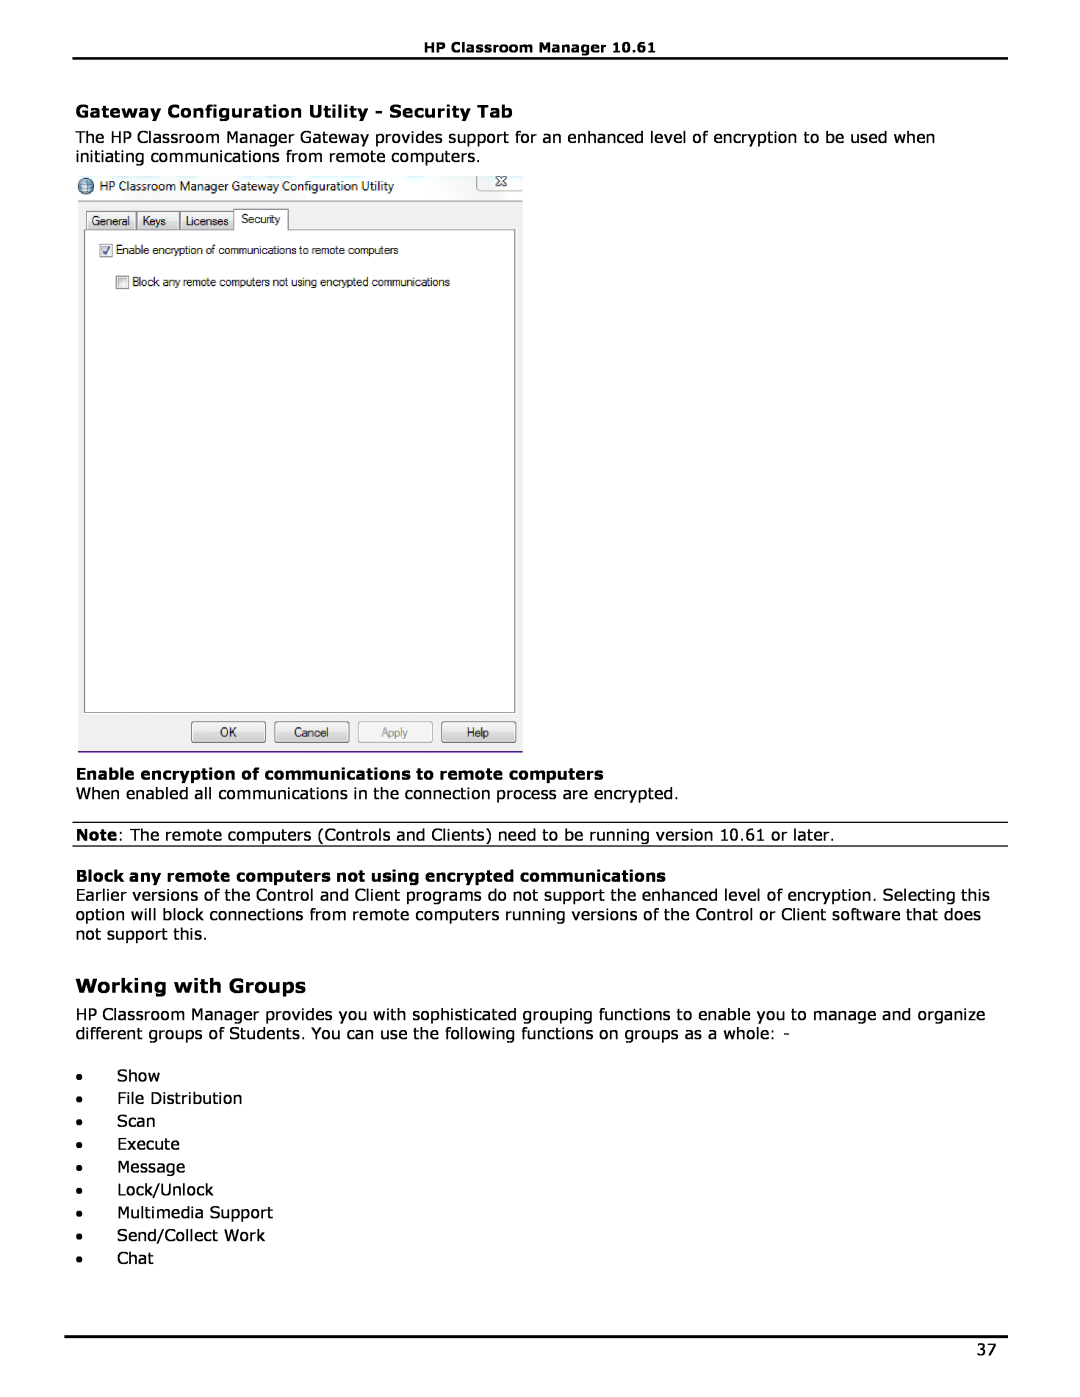 HP Classroom Manager manual Working with Groups, Gateway Configuration Utility - Security Tab 